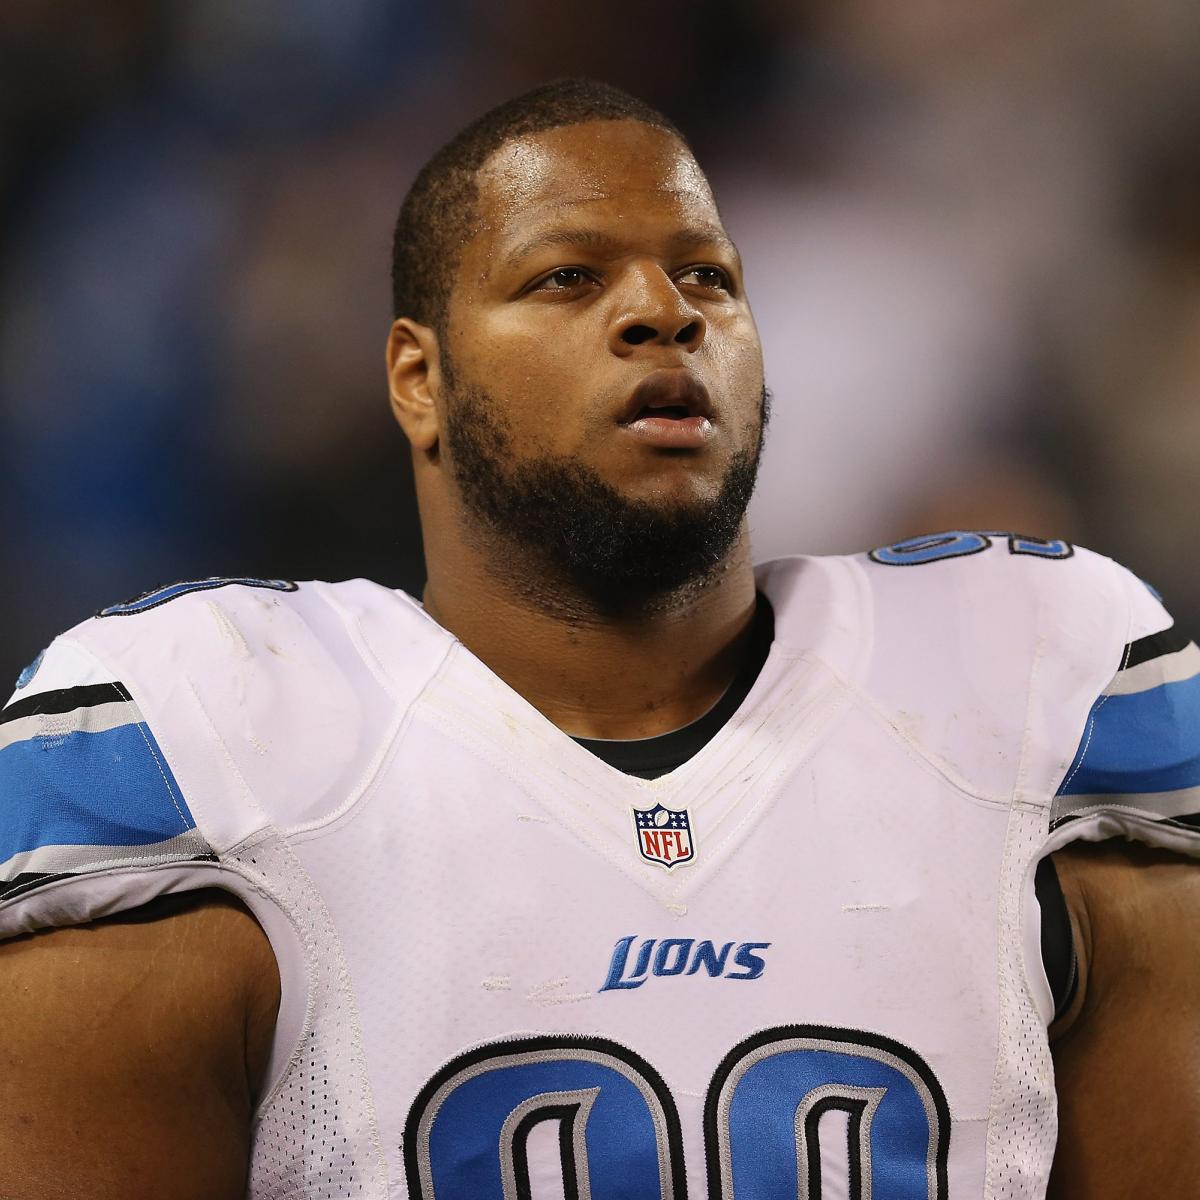 Ndamukong Suh Is the Lions Defensive Lineman Really the NFL's Dirtiest